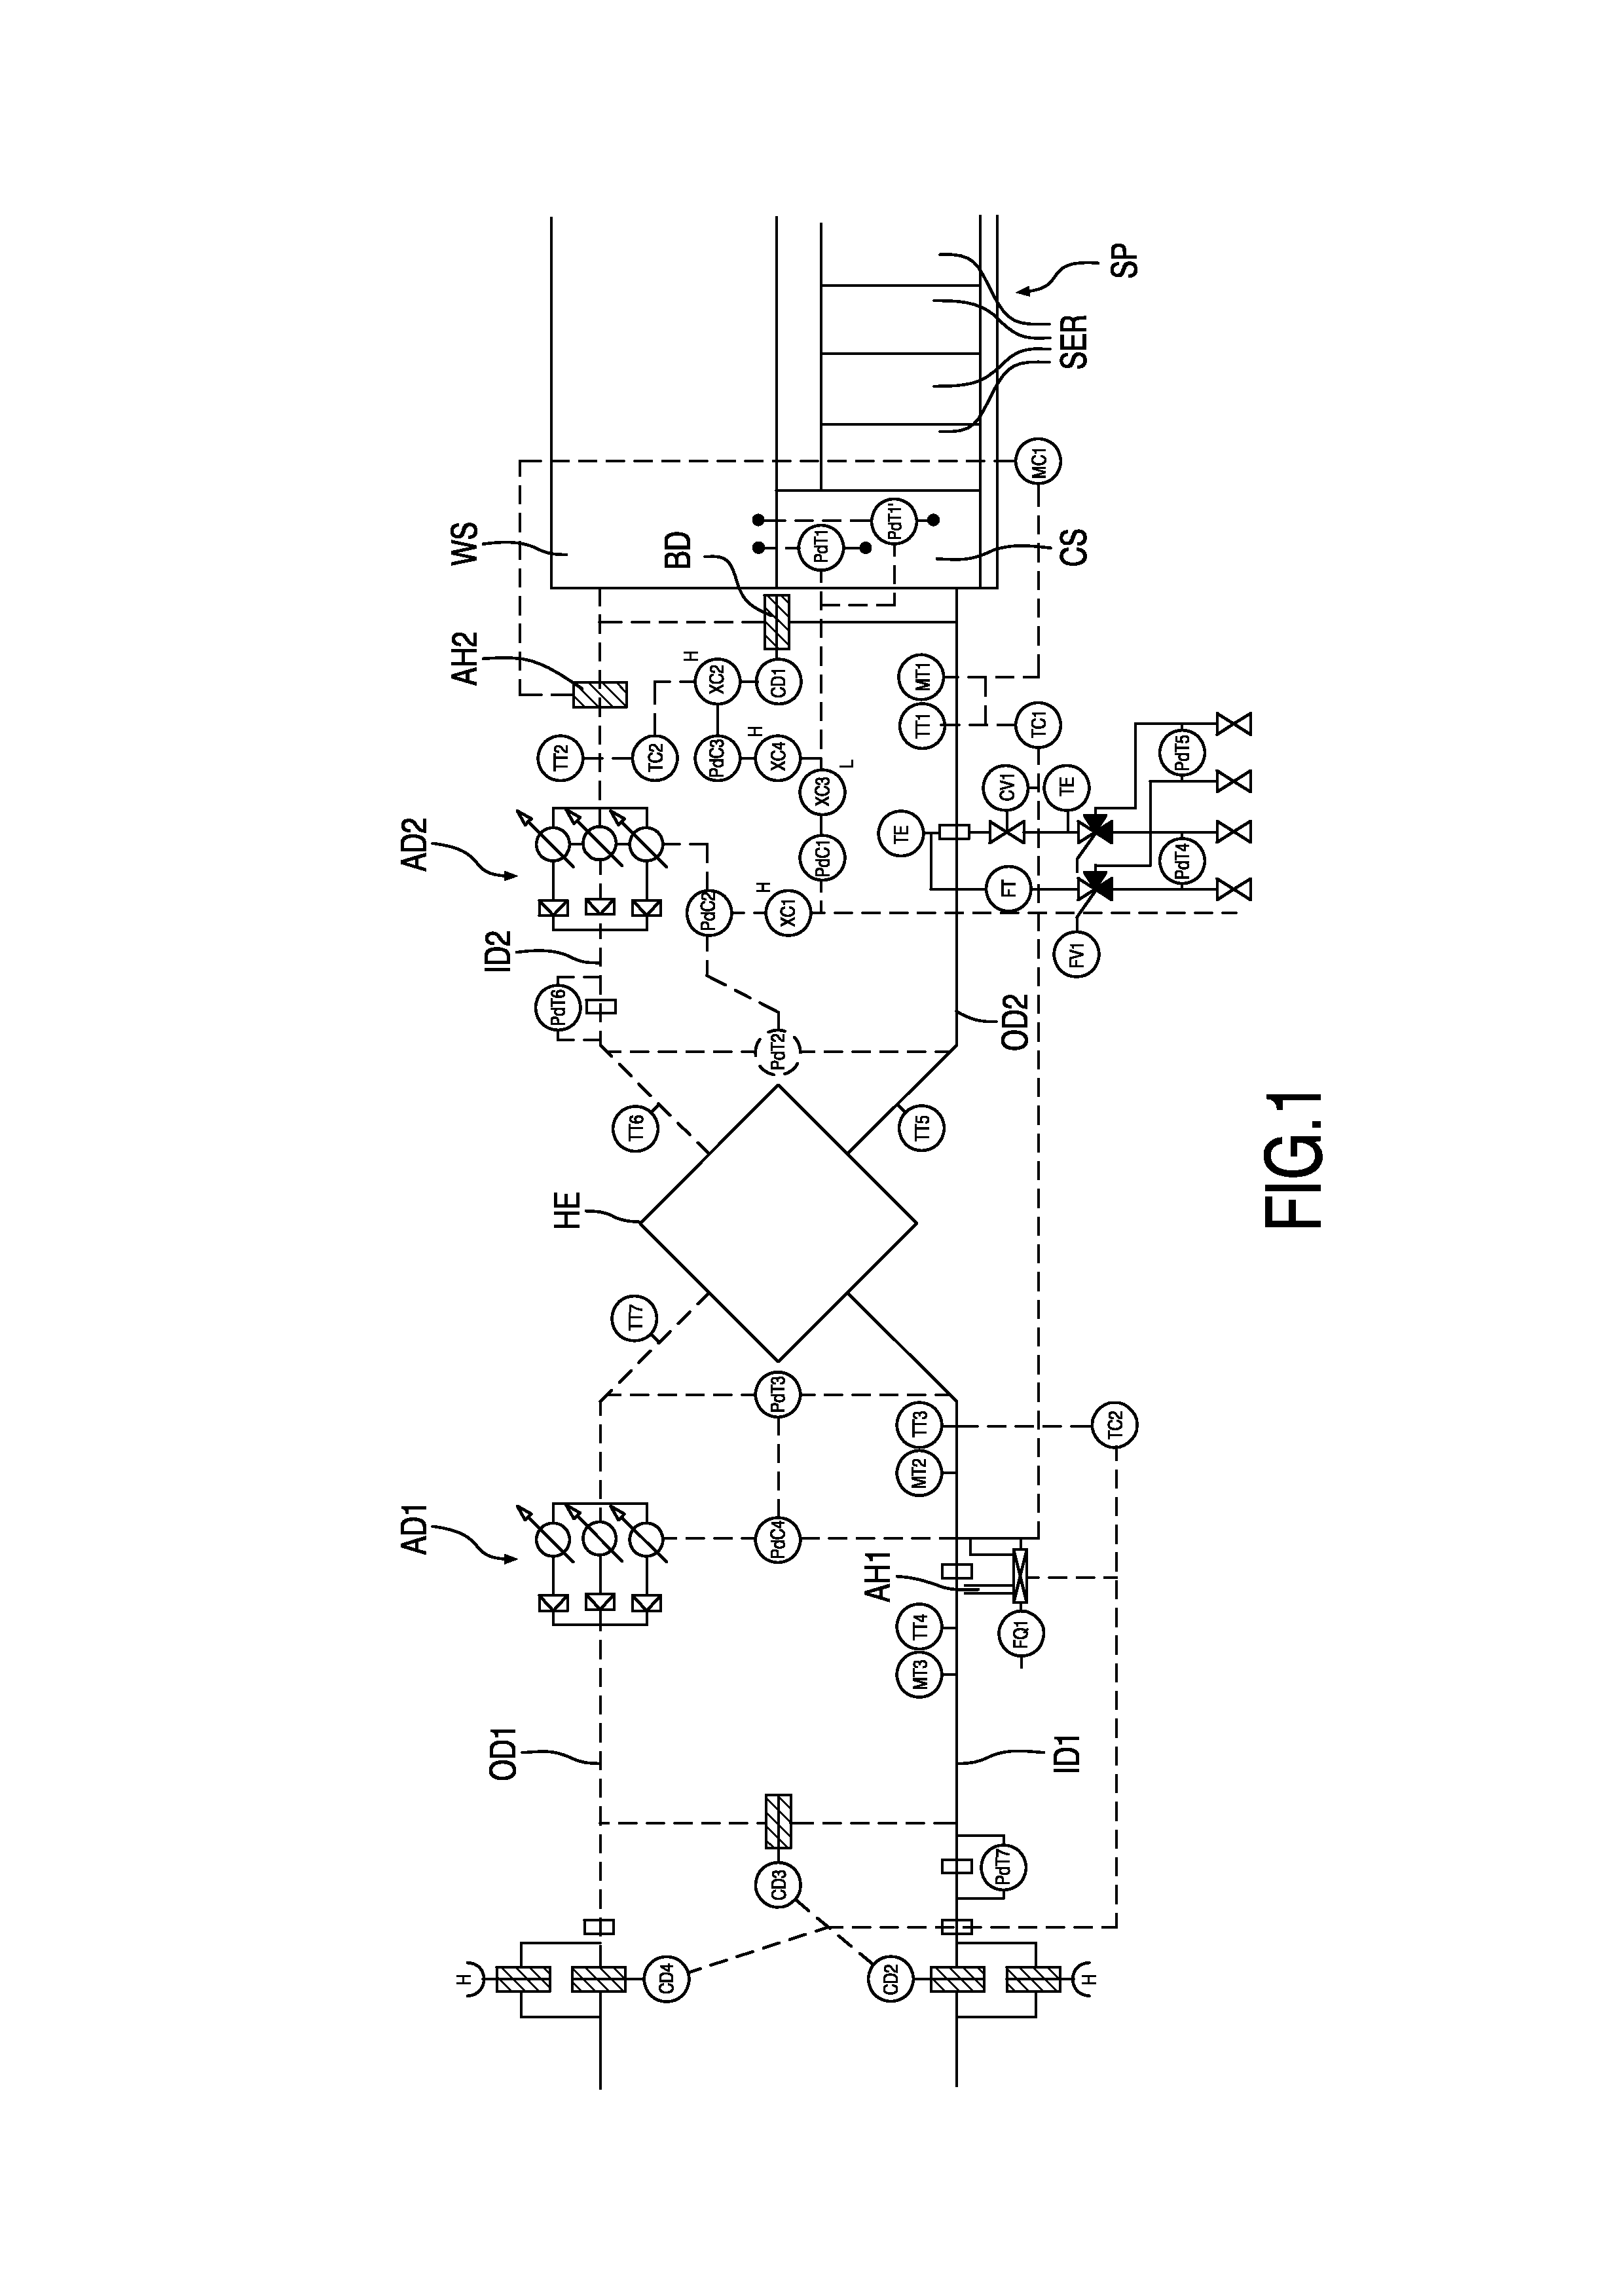 Apparatus and method for cooling a substantially closed space